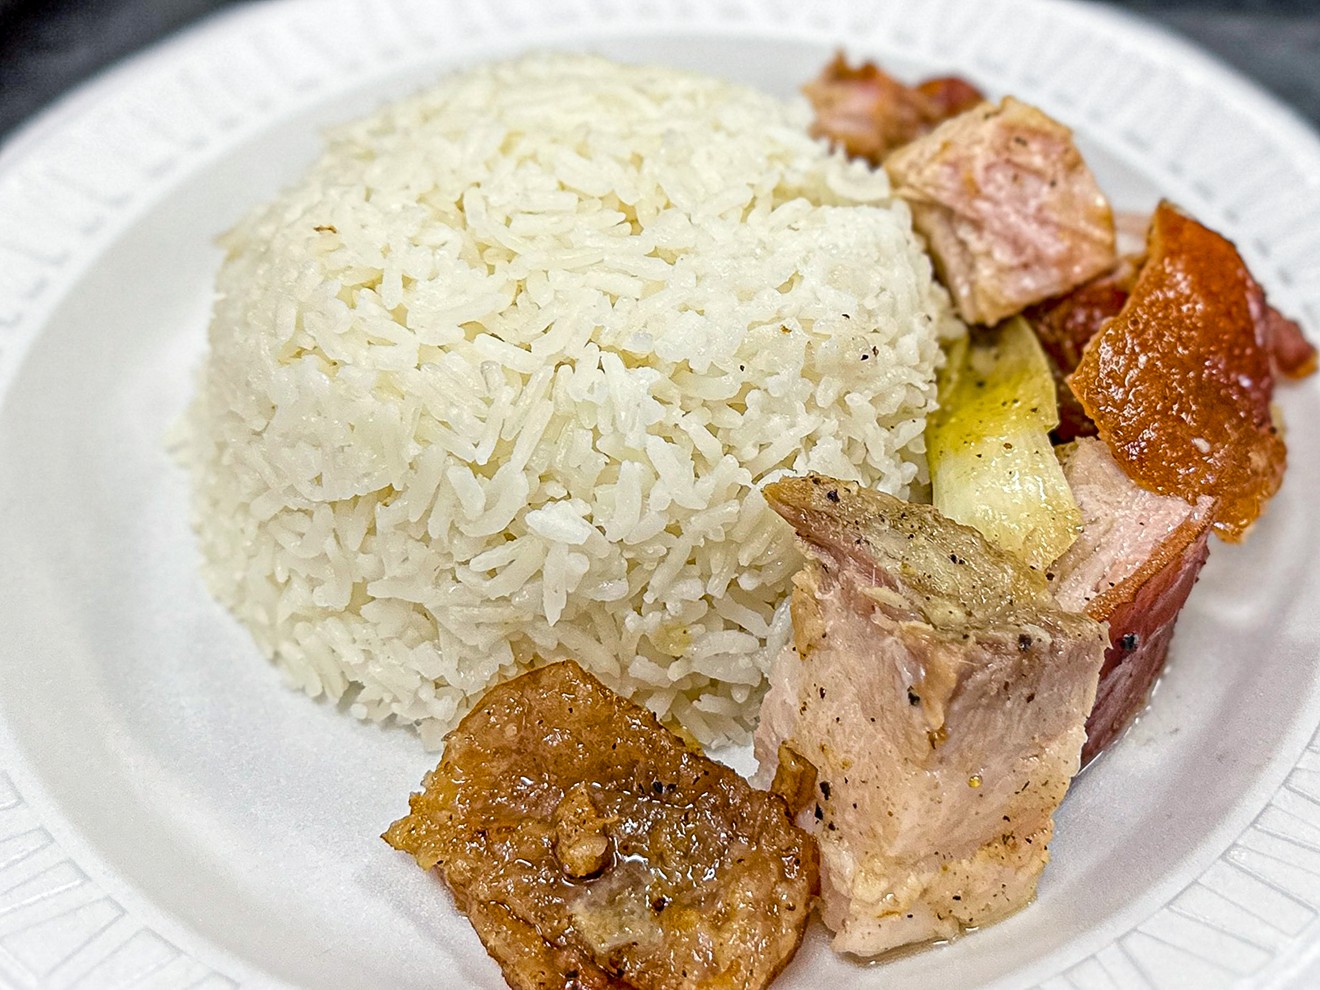 Lechon is a dish not to be missed.